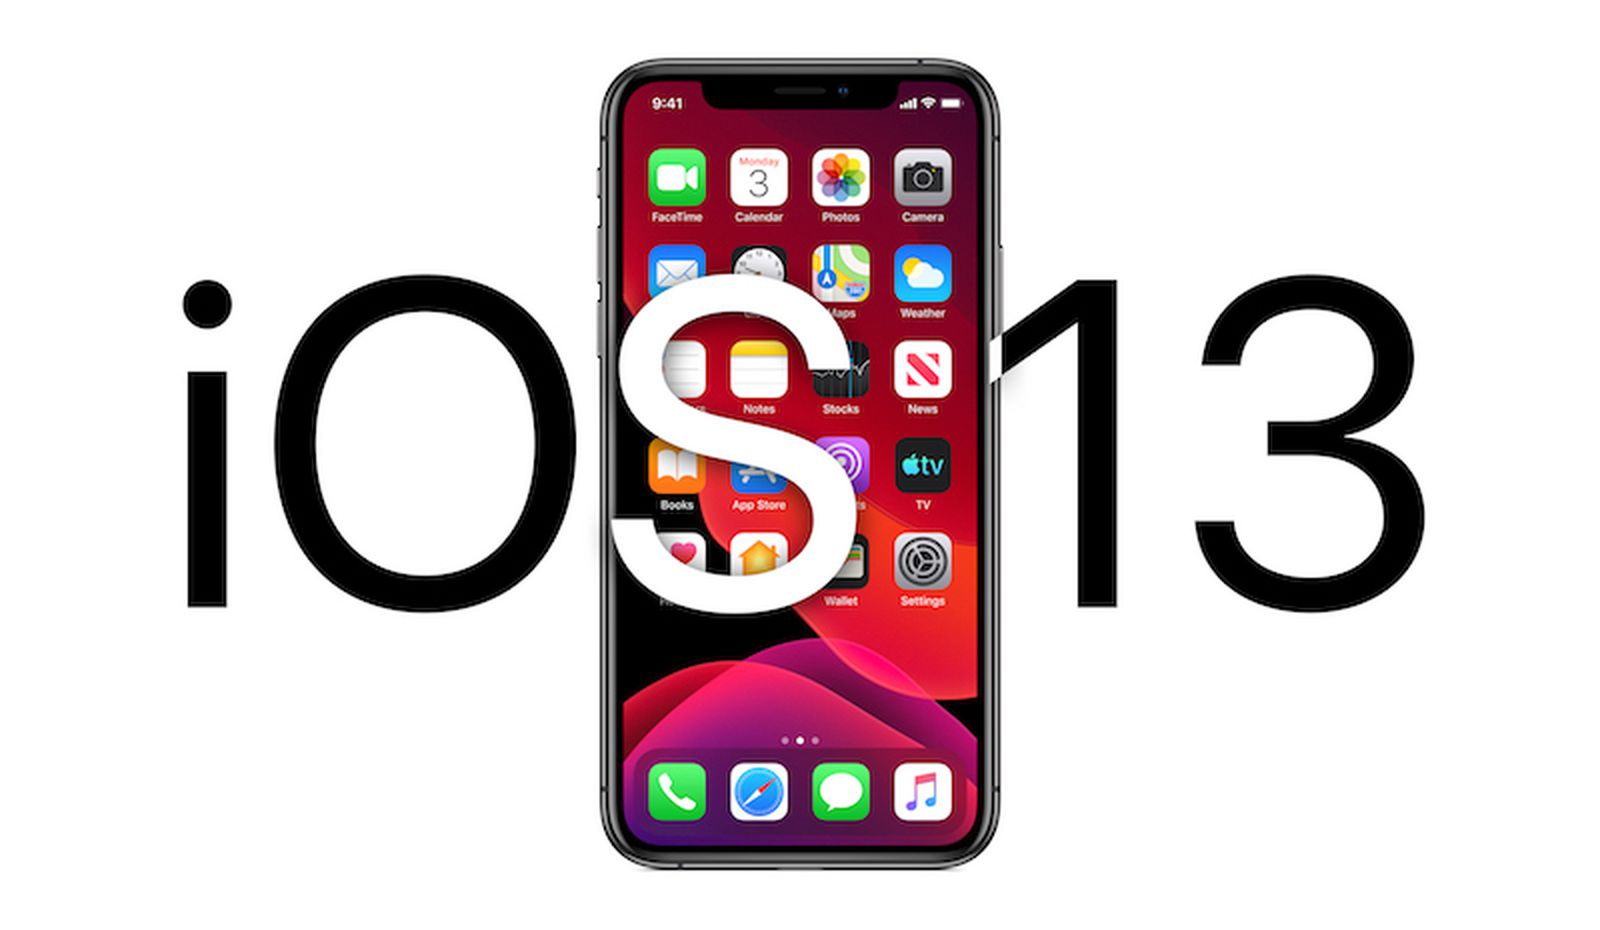 iOS 13 is Finally Around, Discover its Top New Features Here